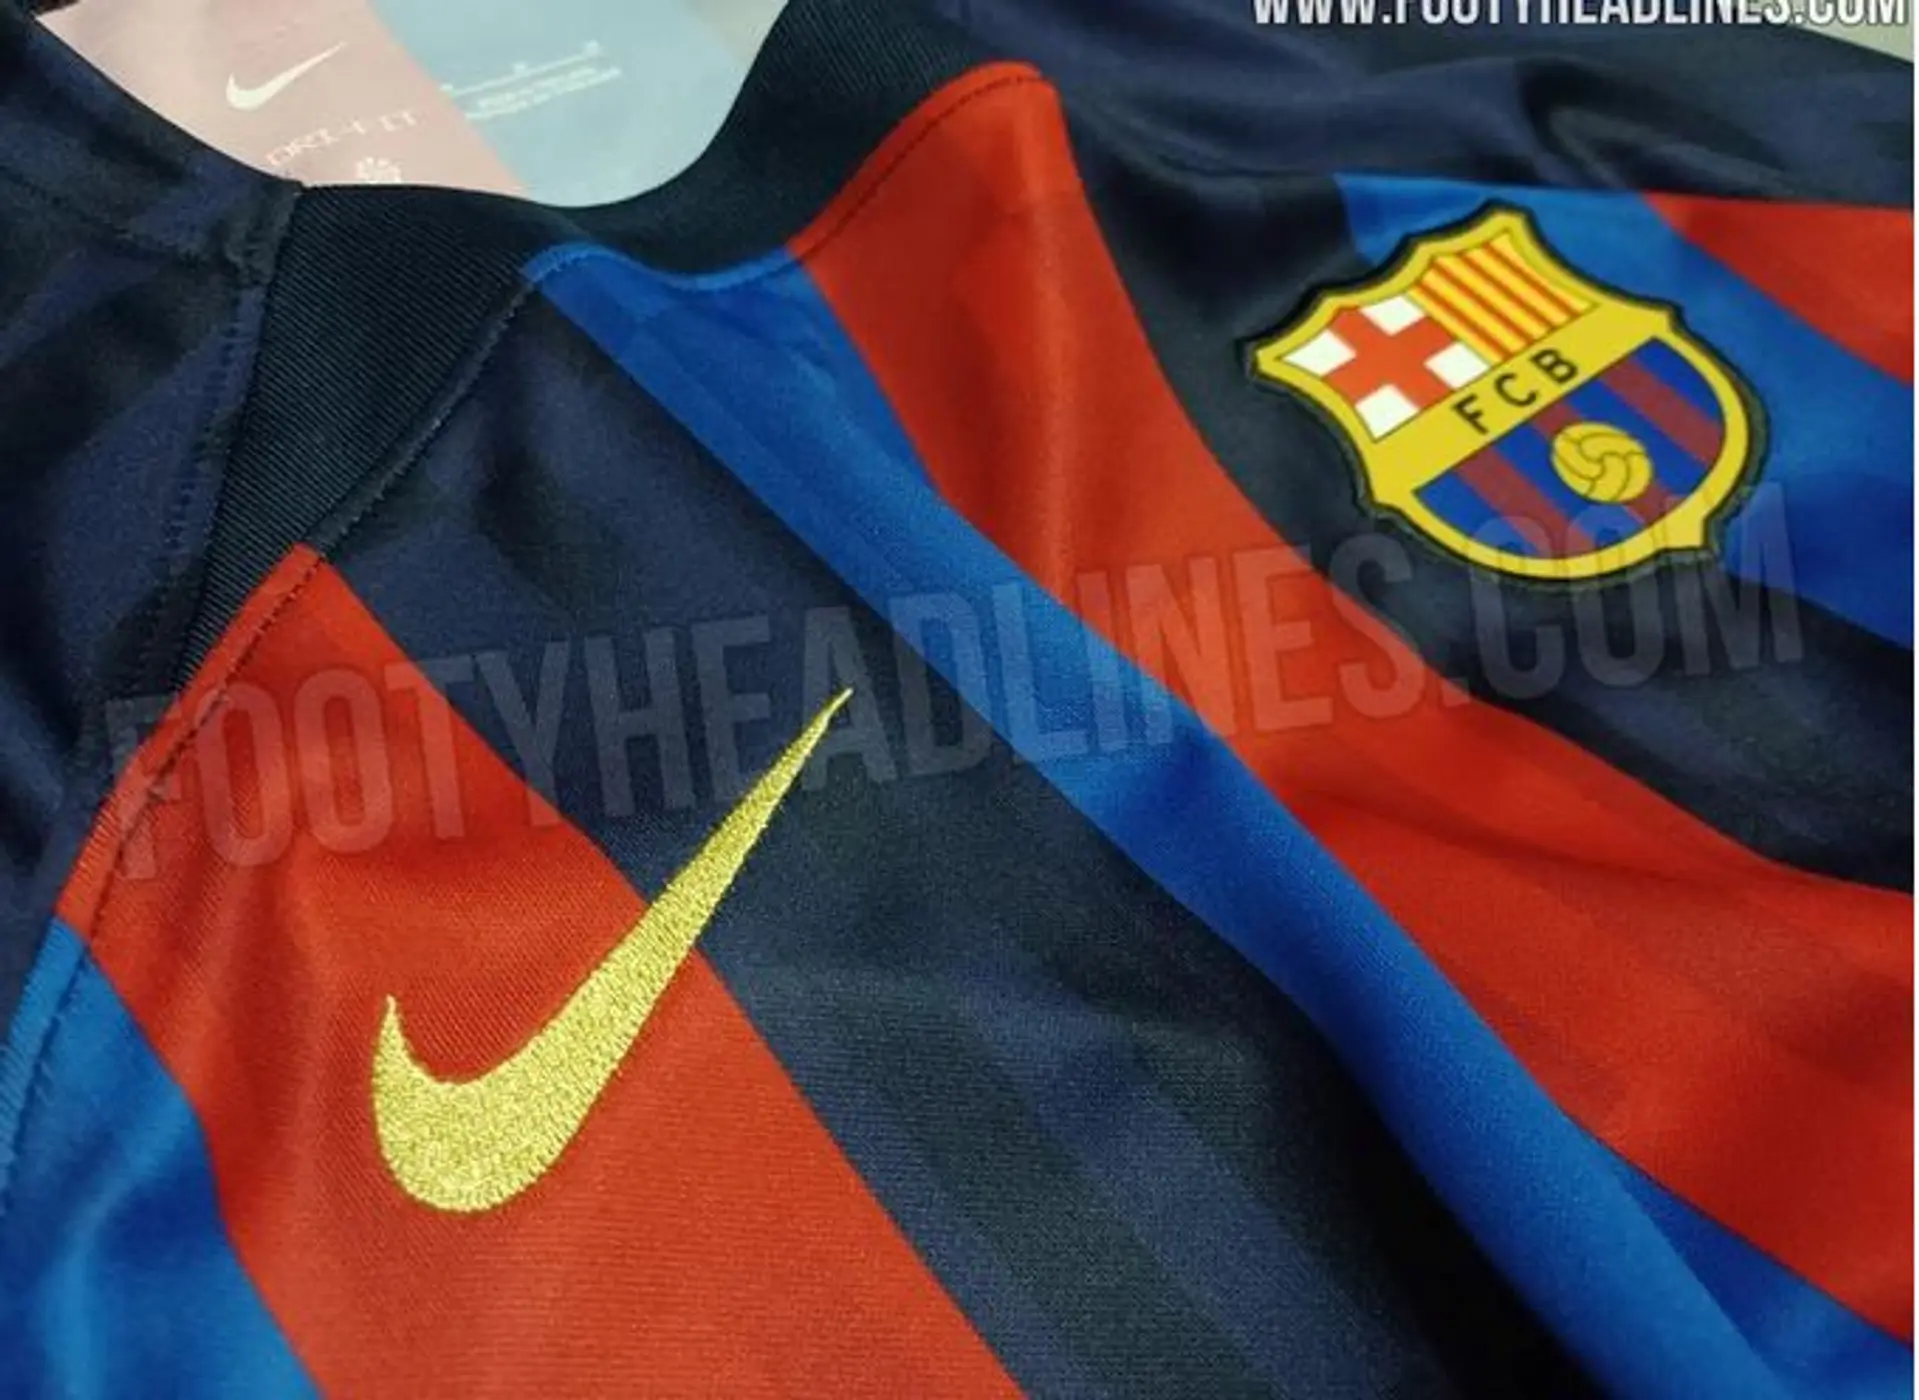 0d1b388c 9650 431e 99c4 c705bb56f623?width=1920&quality=75 Leaked: first pictures of Barca's 2022/23 home kit